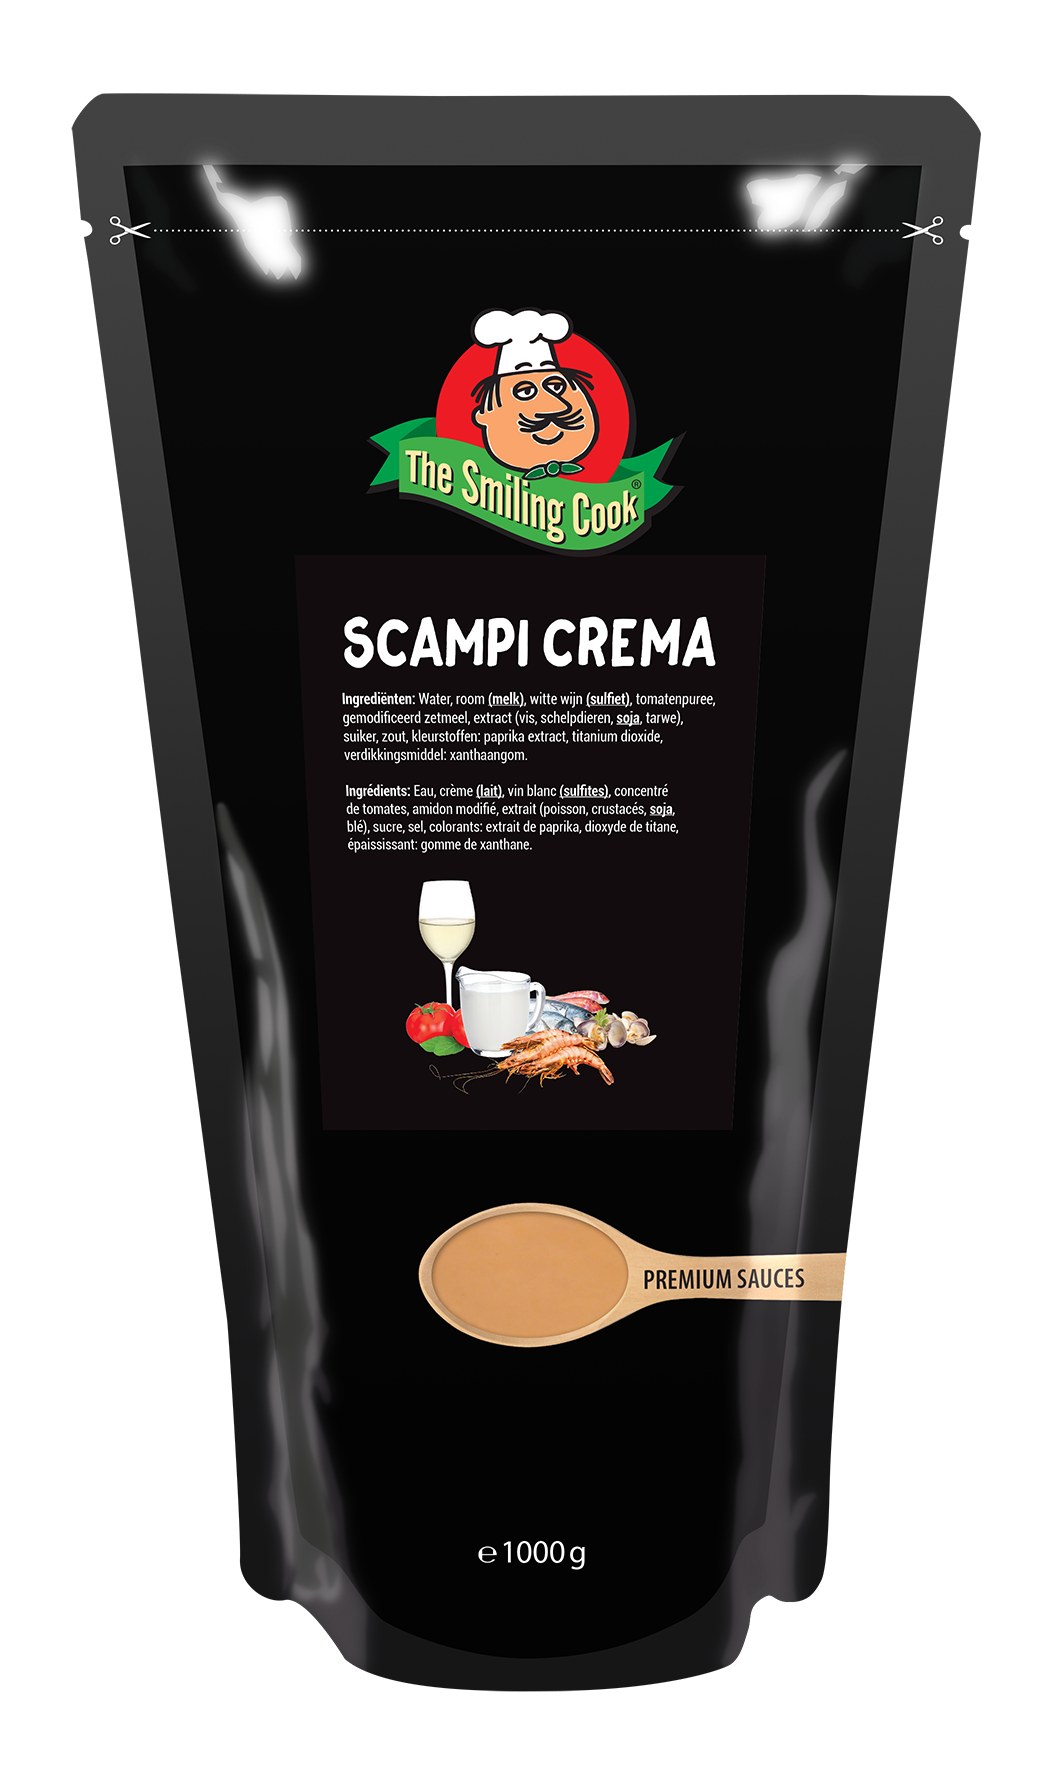 Sauce pour Pates Scampi Creme 6x1kg The Smiling Cook